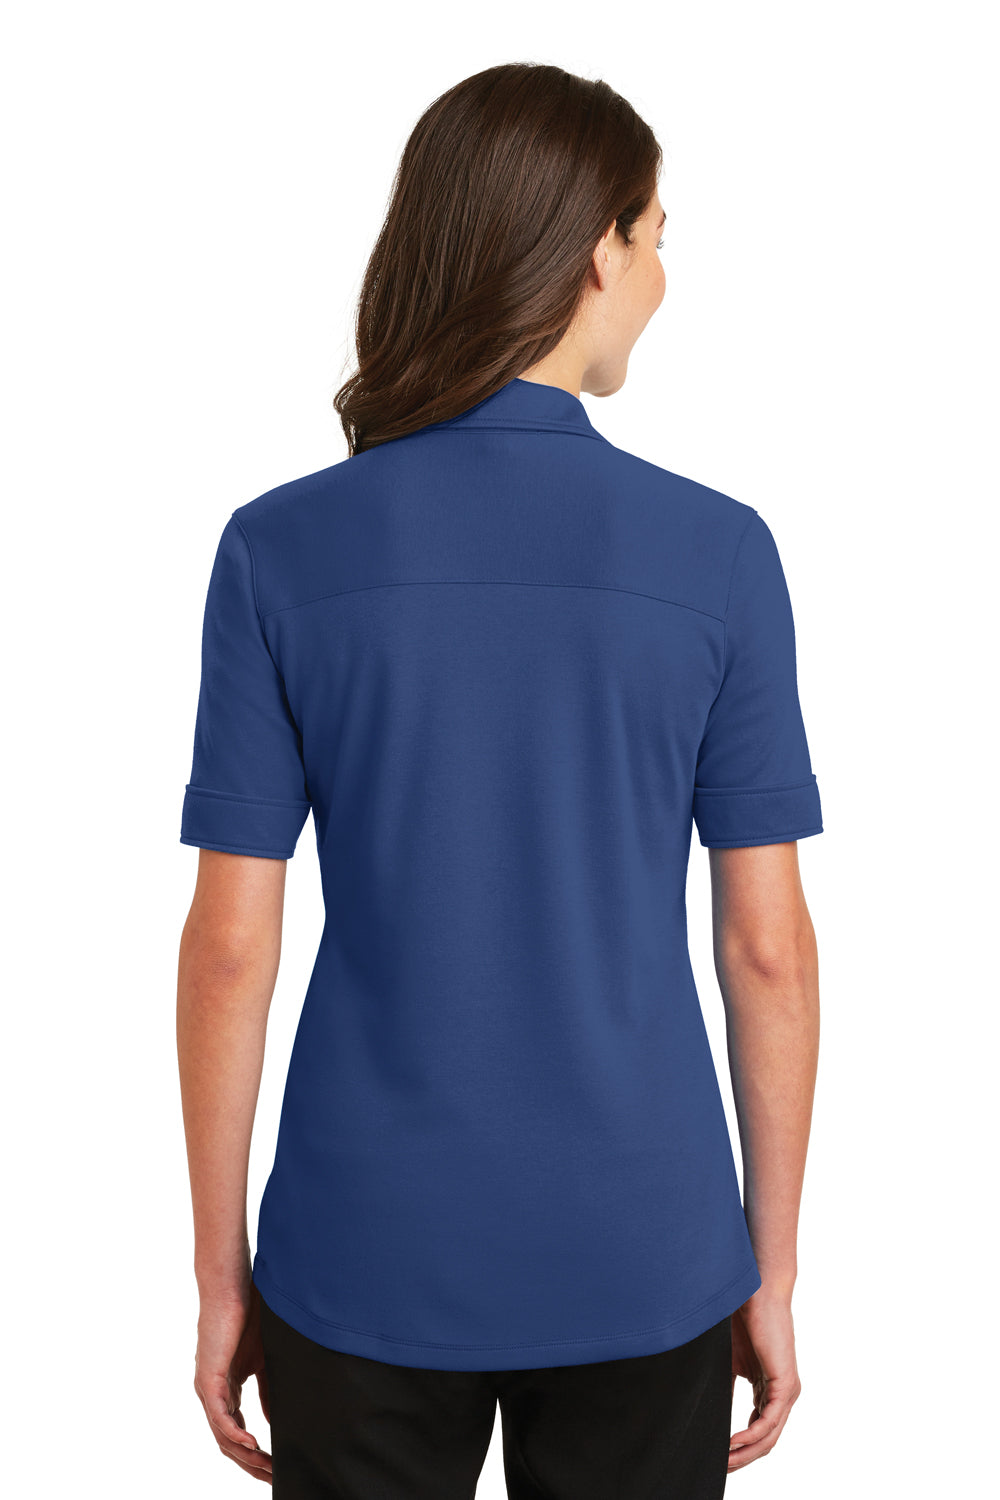 Port Authority L5200 Womens Silk Touch Performance Moisture Wicking Short Sleeve Polo Shirt Royal Blue Back